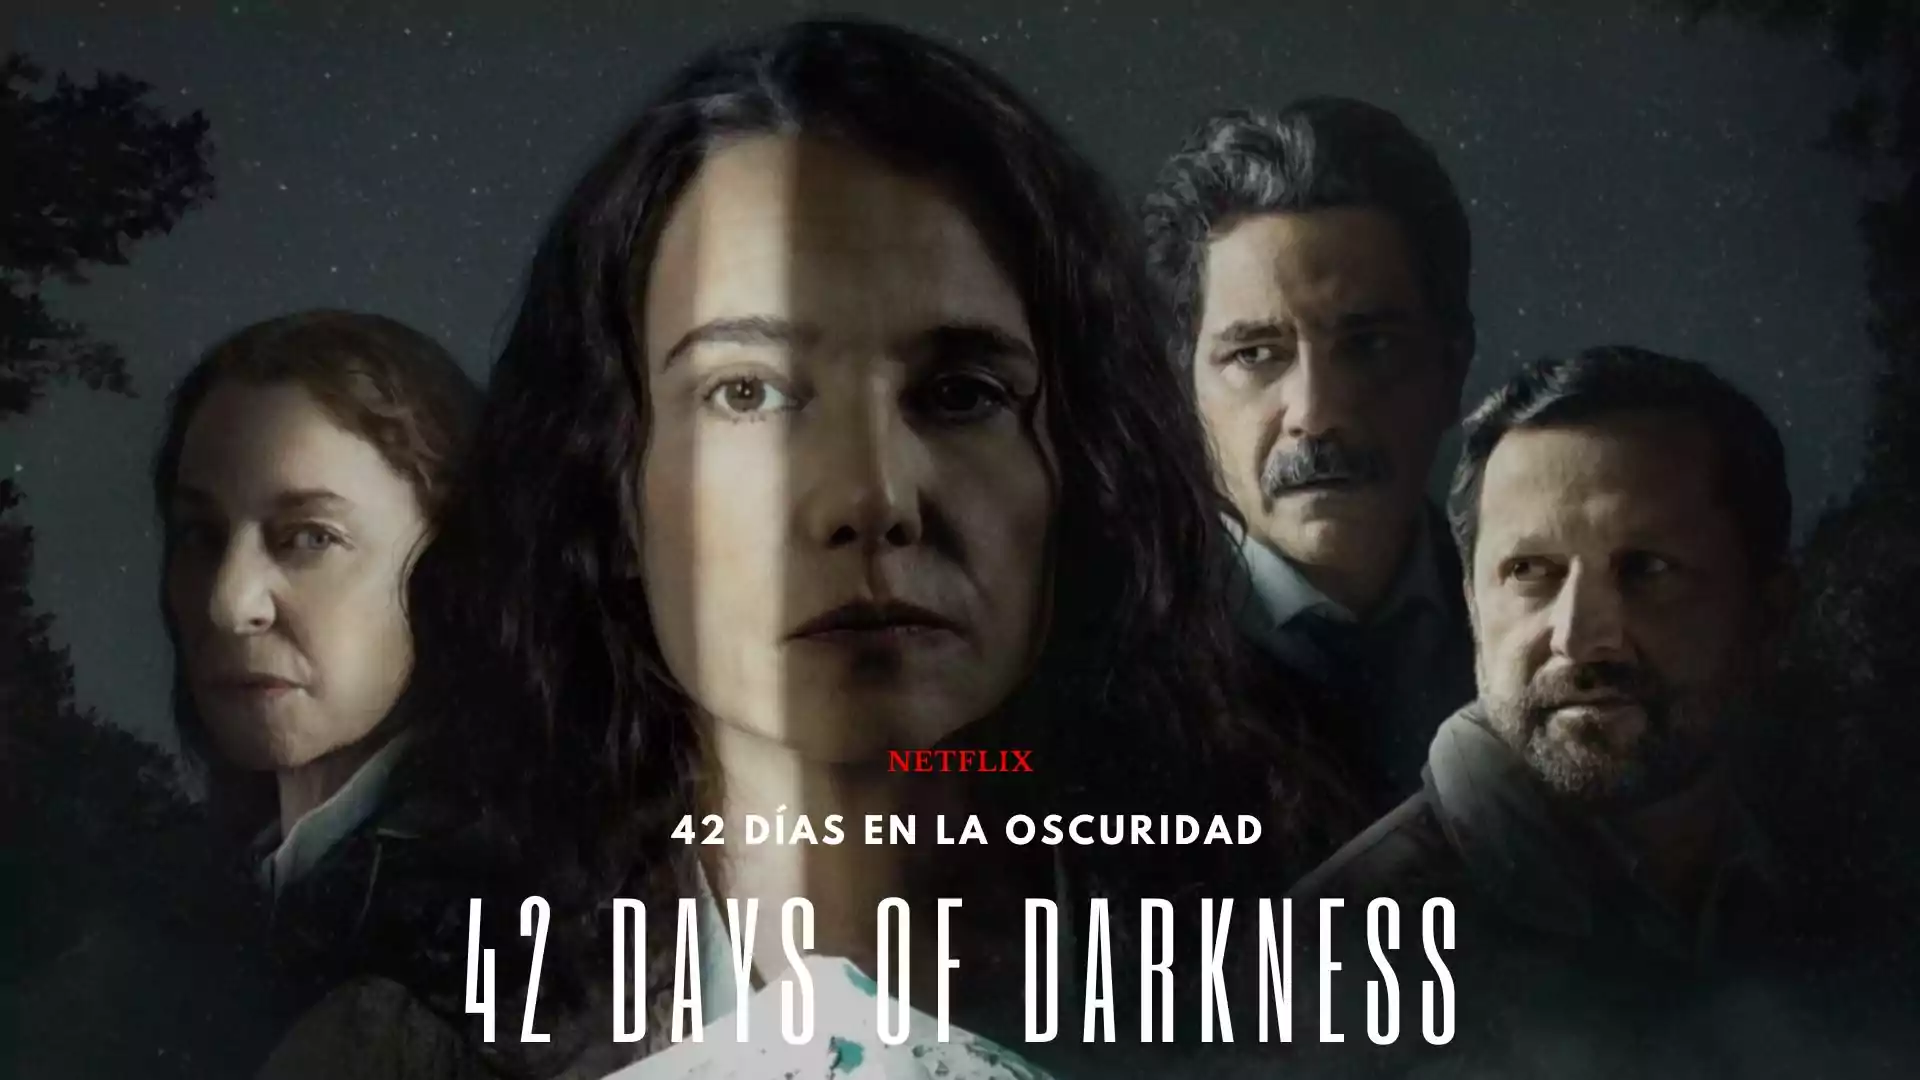 42 Days of Darkness Parents Guide. 42 Days of Darkness Age Rating. Netflix upcoming series 42 Days of Darkness release date, cast, overview.